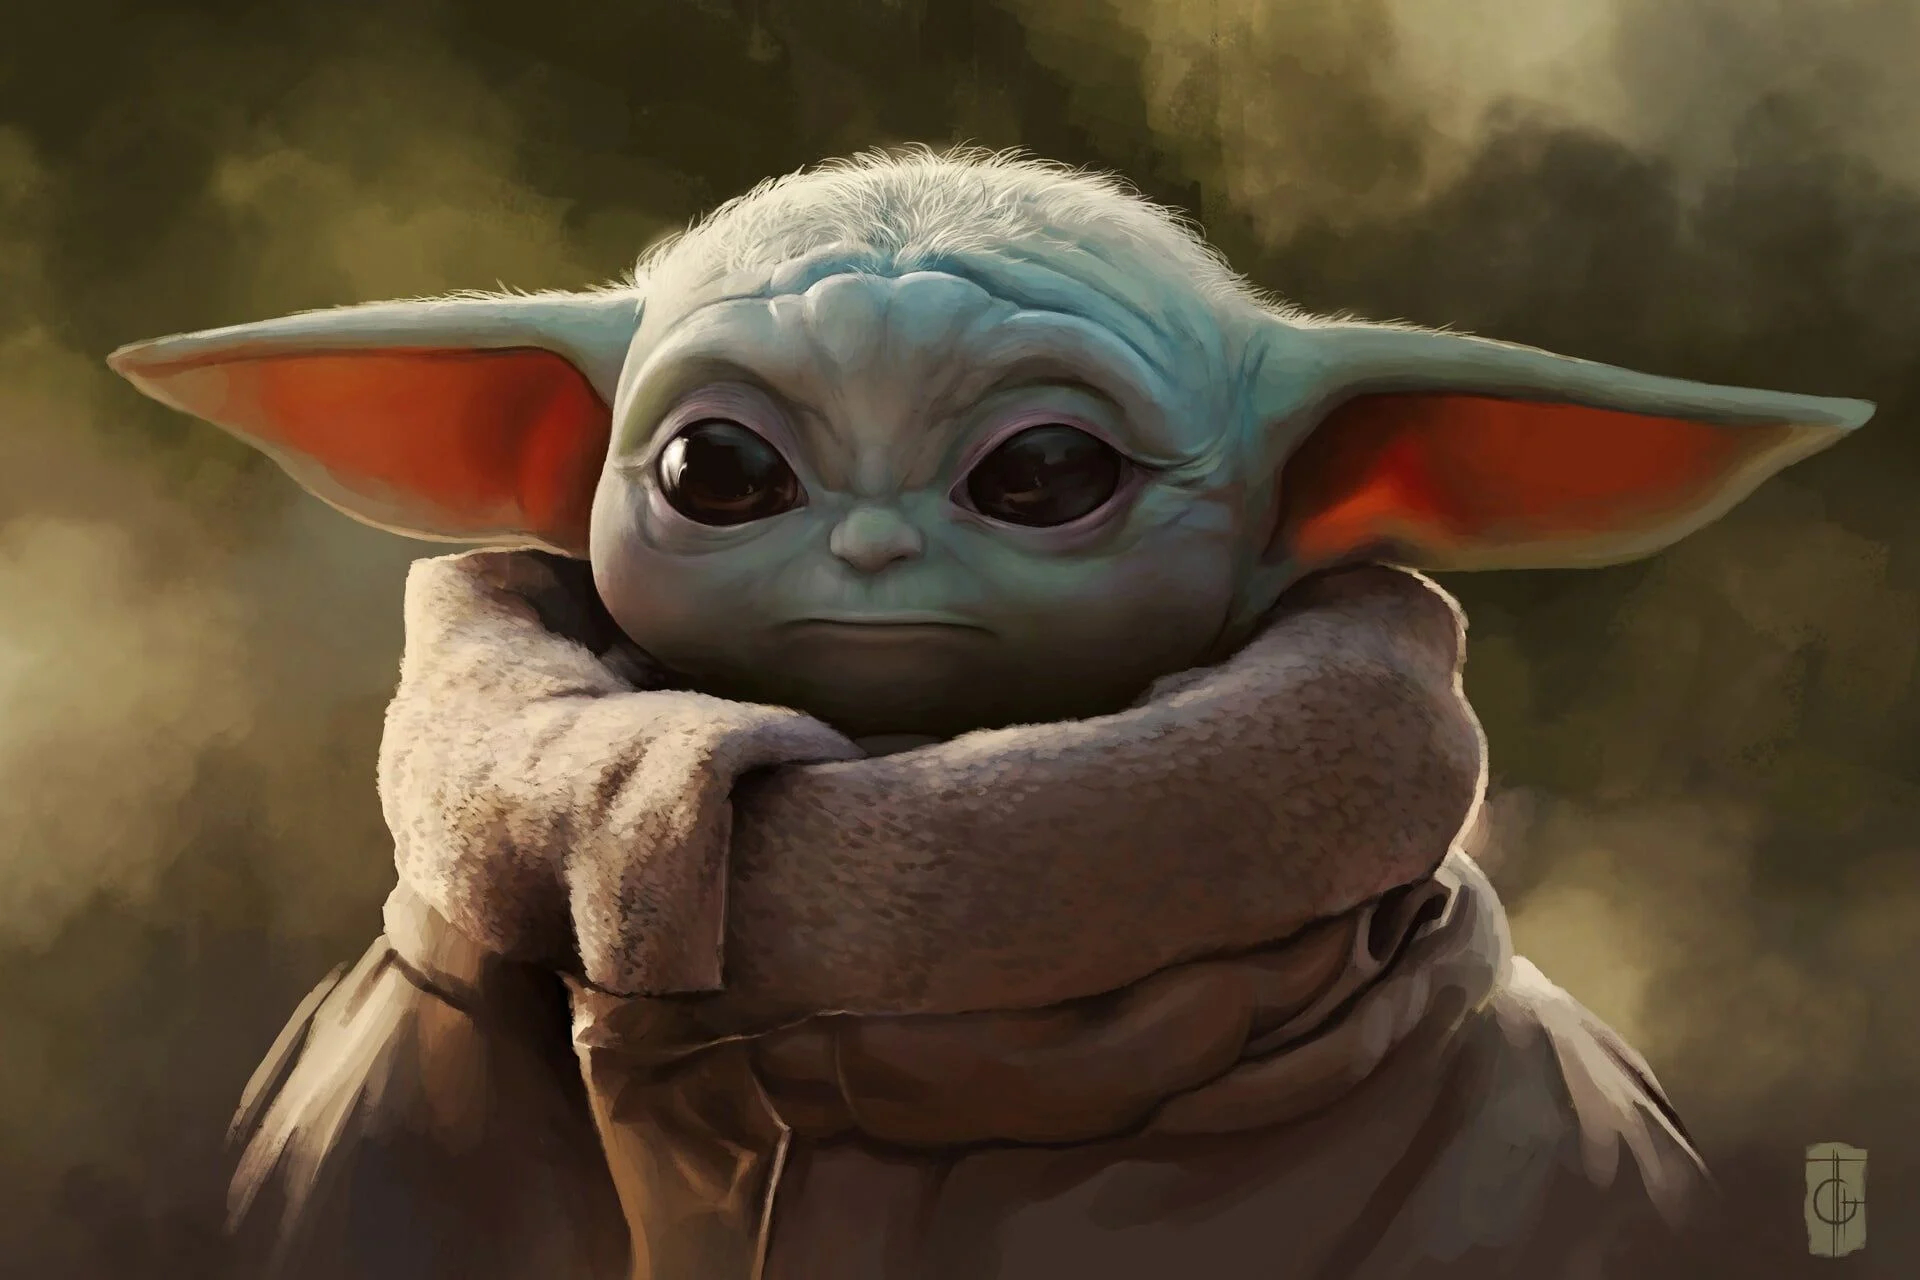 1920x1280 Star Wars Baby Yoda Wallpapers Top Free Star Wars Baby Yoda Backgrounds